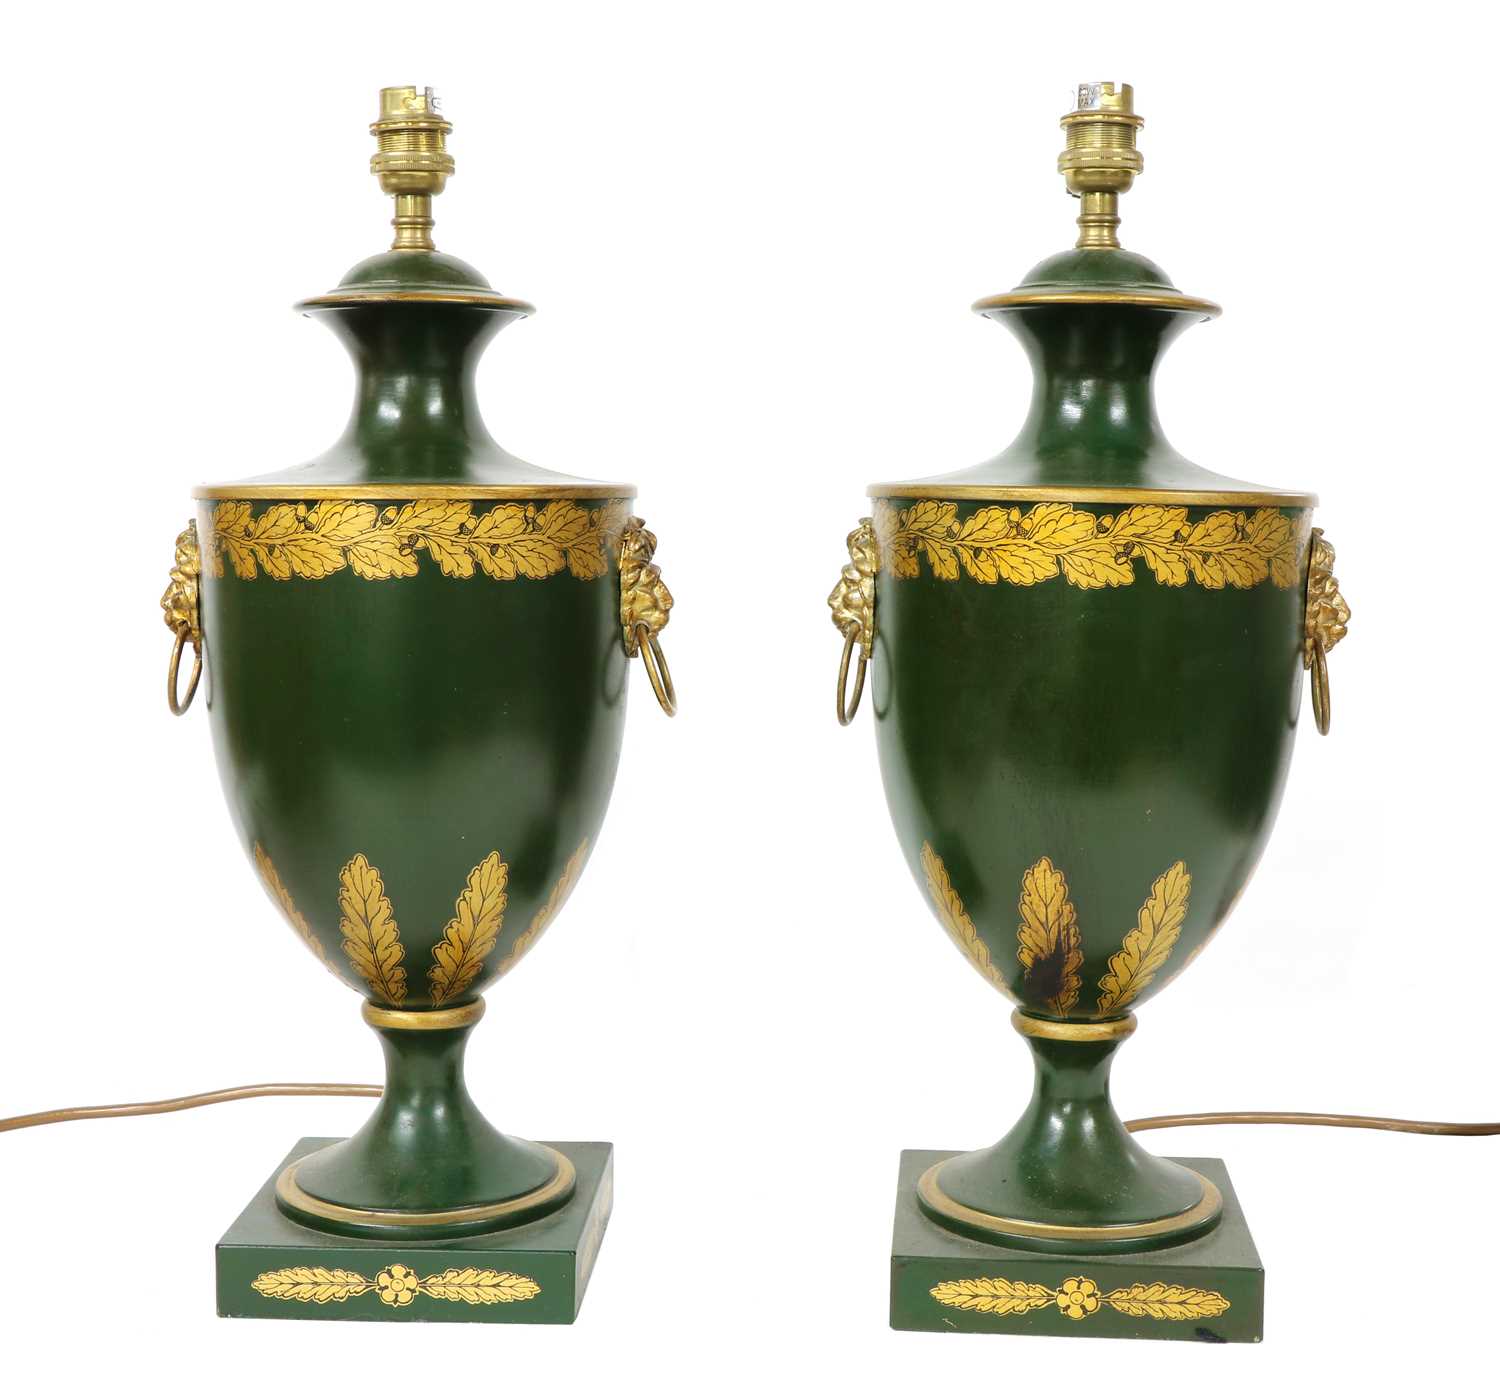 Lot 105 - A pair of Toleware table lamps